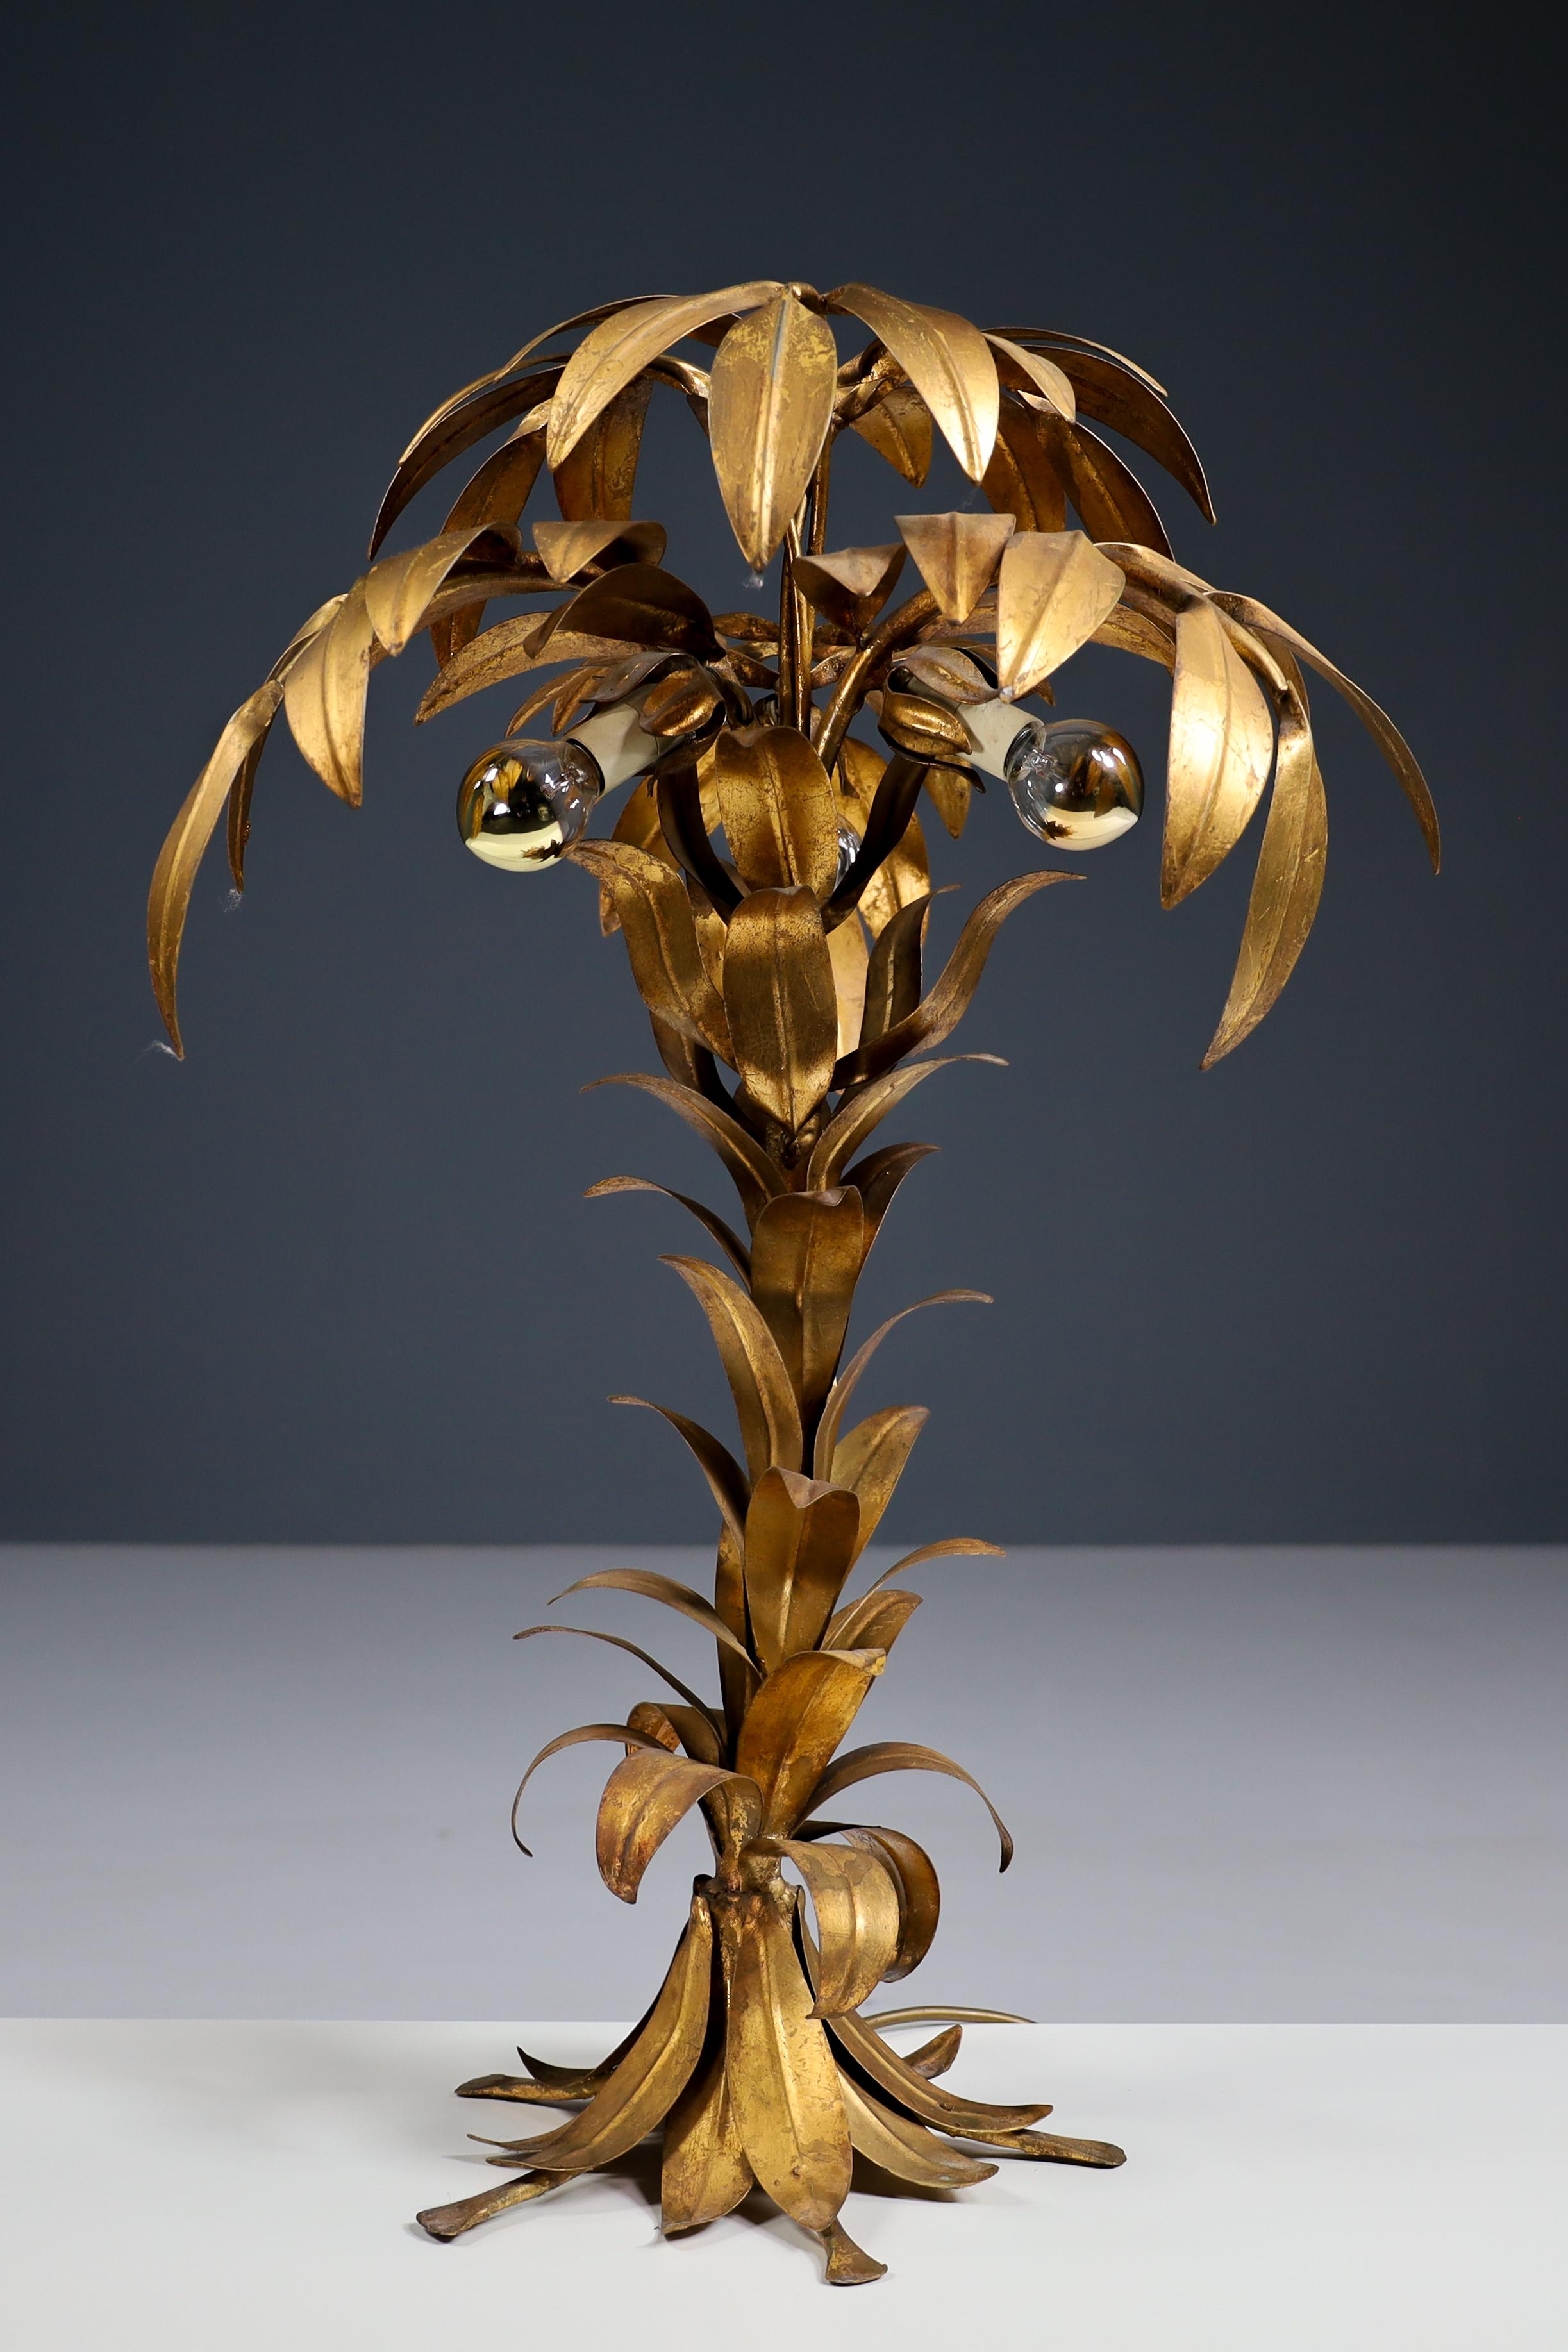 Pair of two Gilt Palm tree tables lamp by Hans Kögl, Germay 1970s

Impressive pair of patinated gilt metal palm tree table lamps by German designer Hans Kögl made and designed in the 70s. Three small light points under the leaves give this design